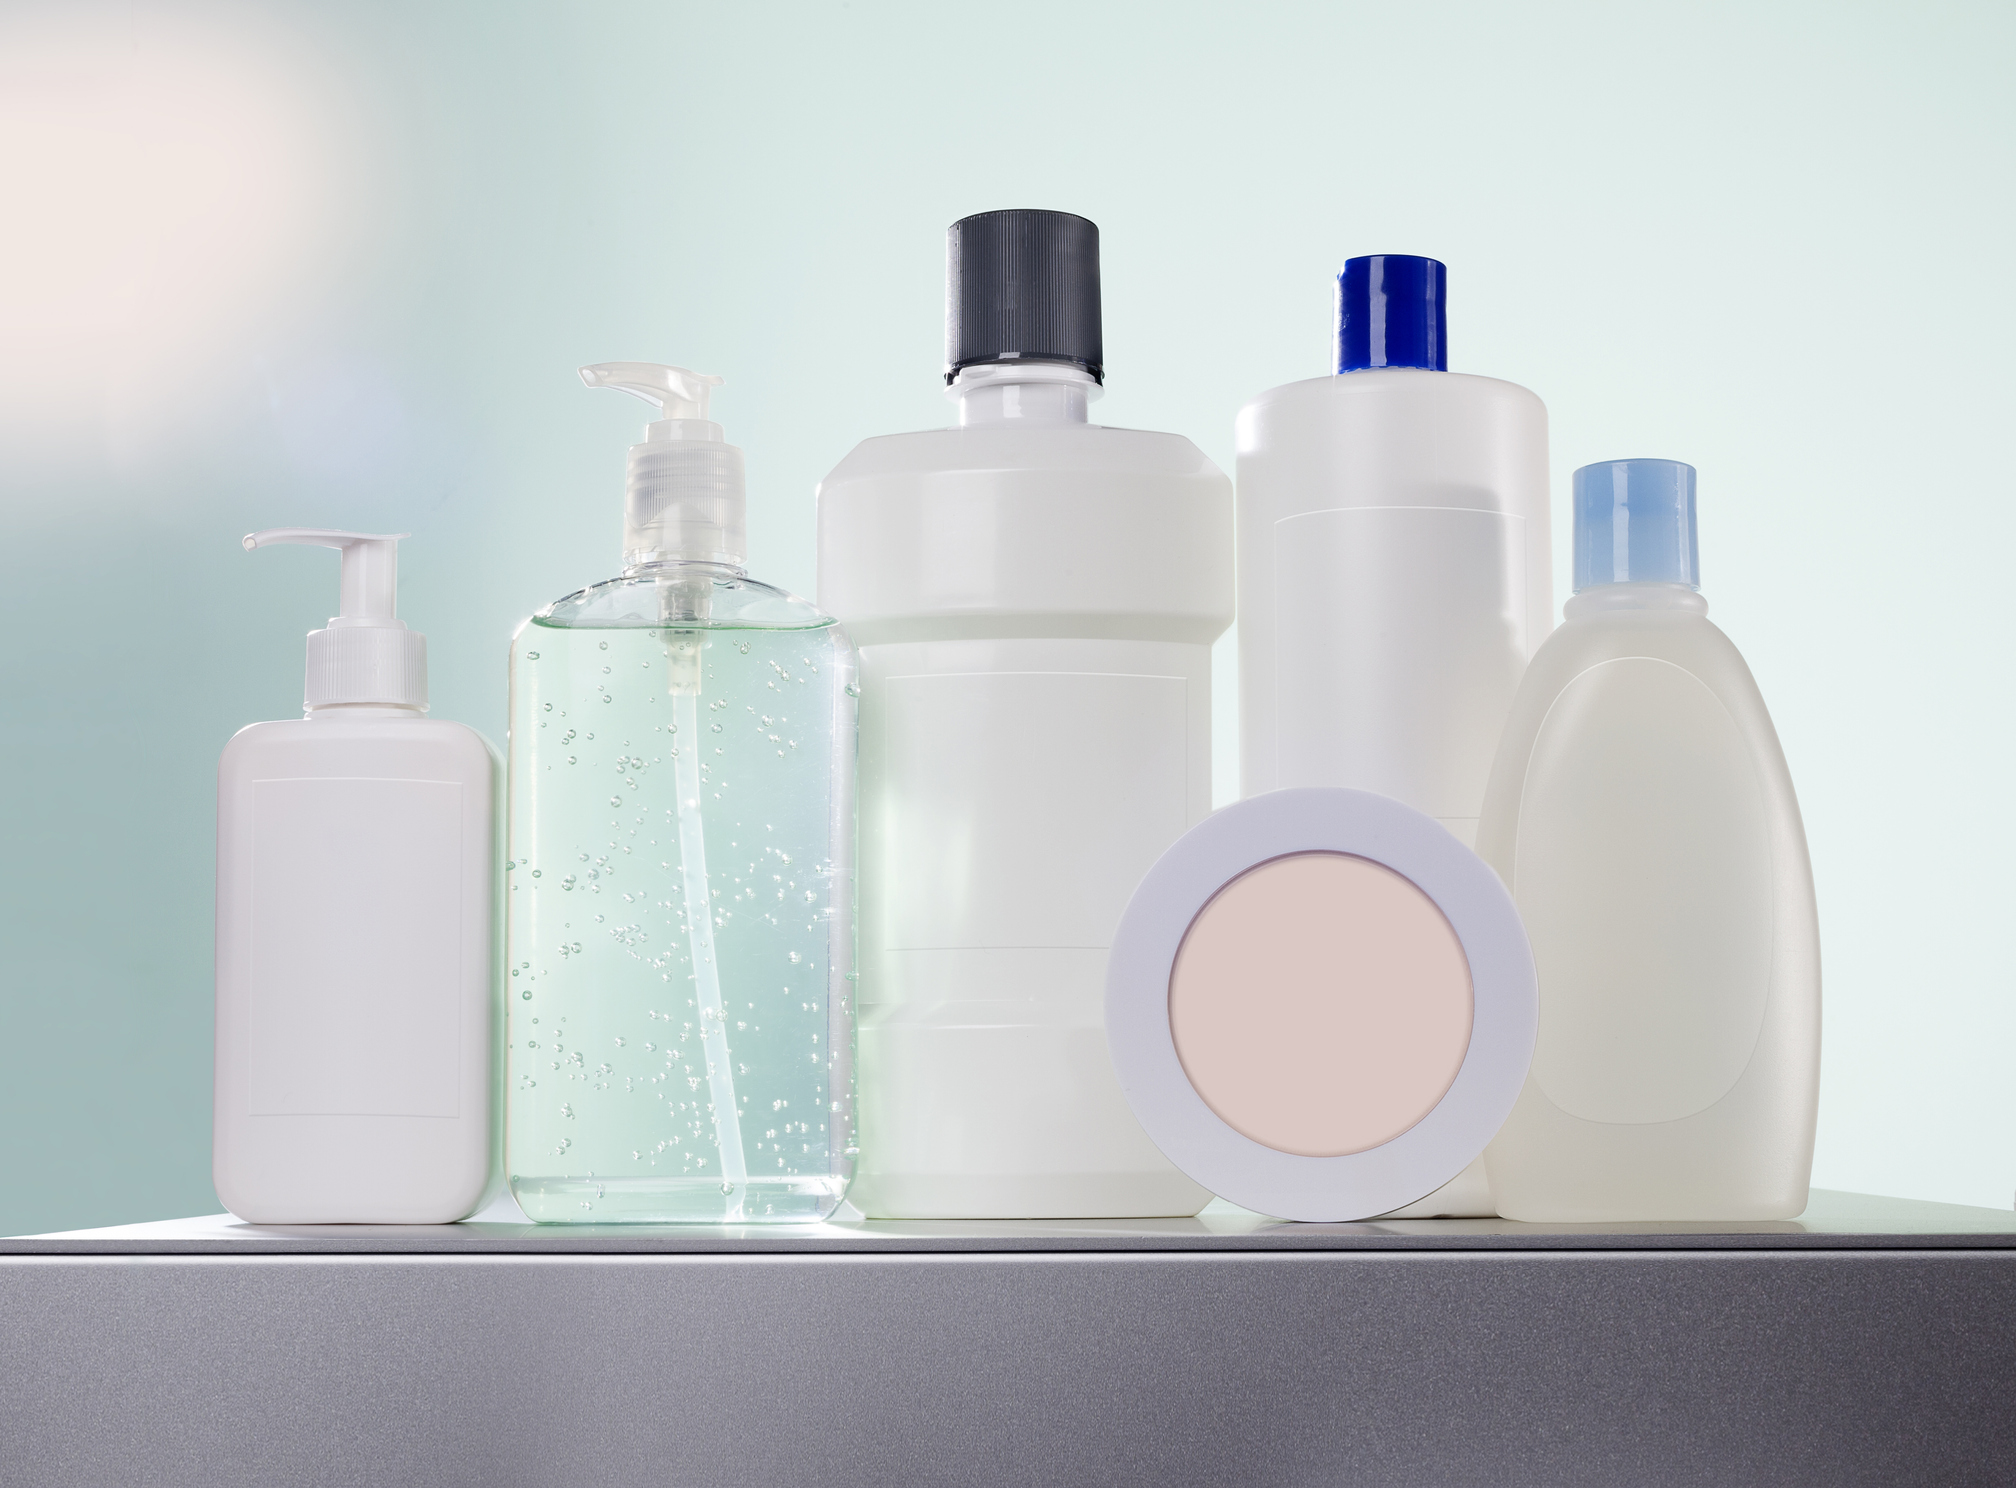 which products contain triclosan